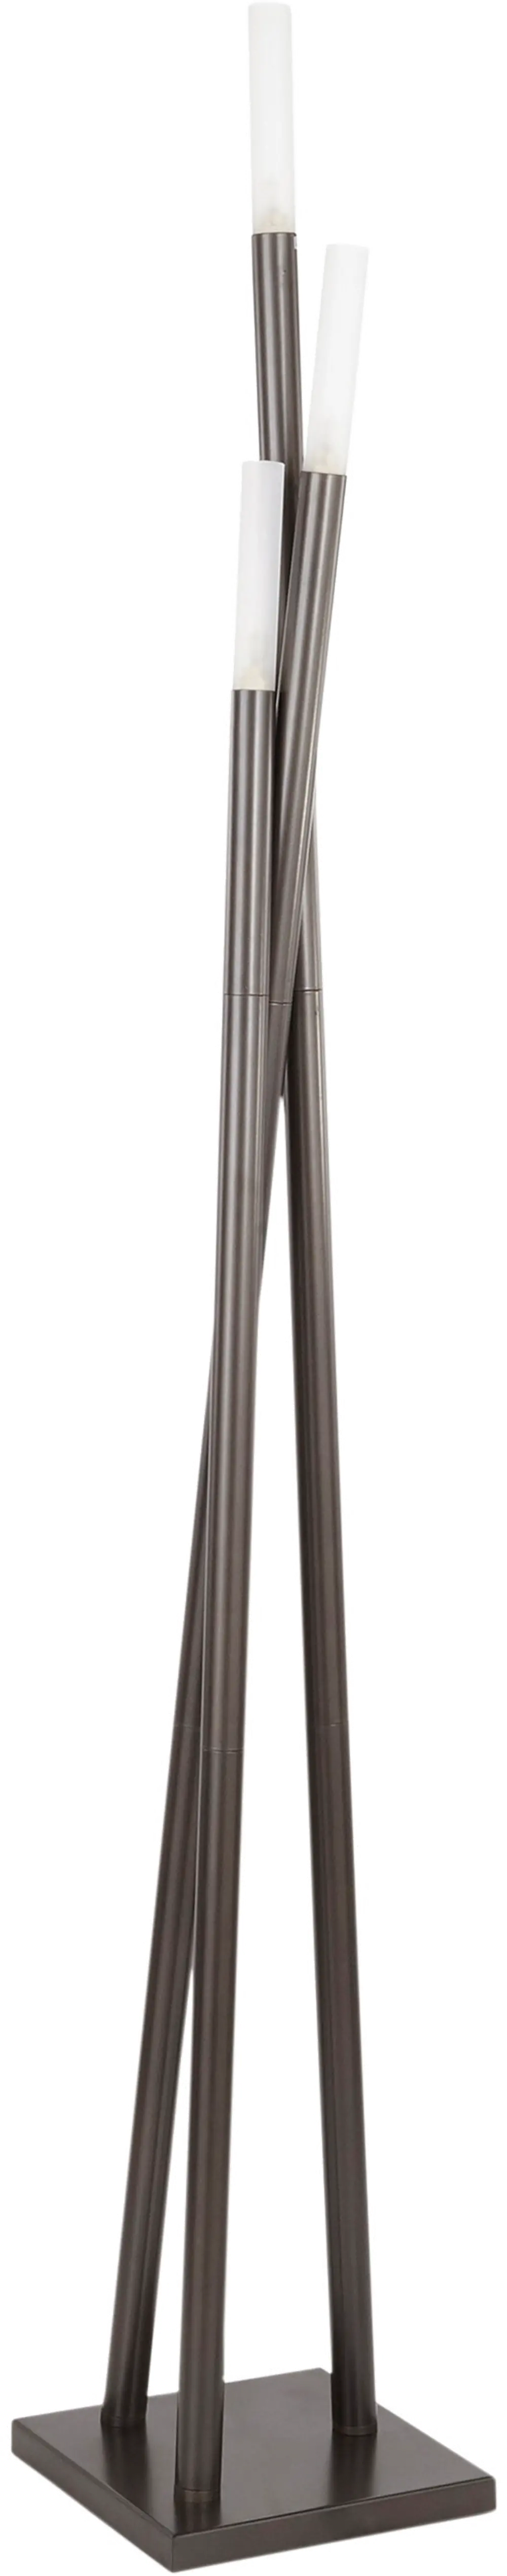 LSH-ICICLE-FL-AN Modern Floor Lamp in Antique Metal - Icicle-1